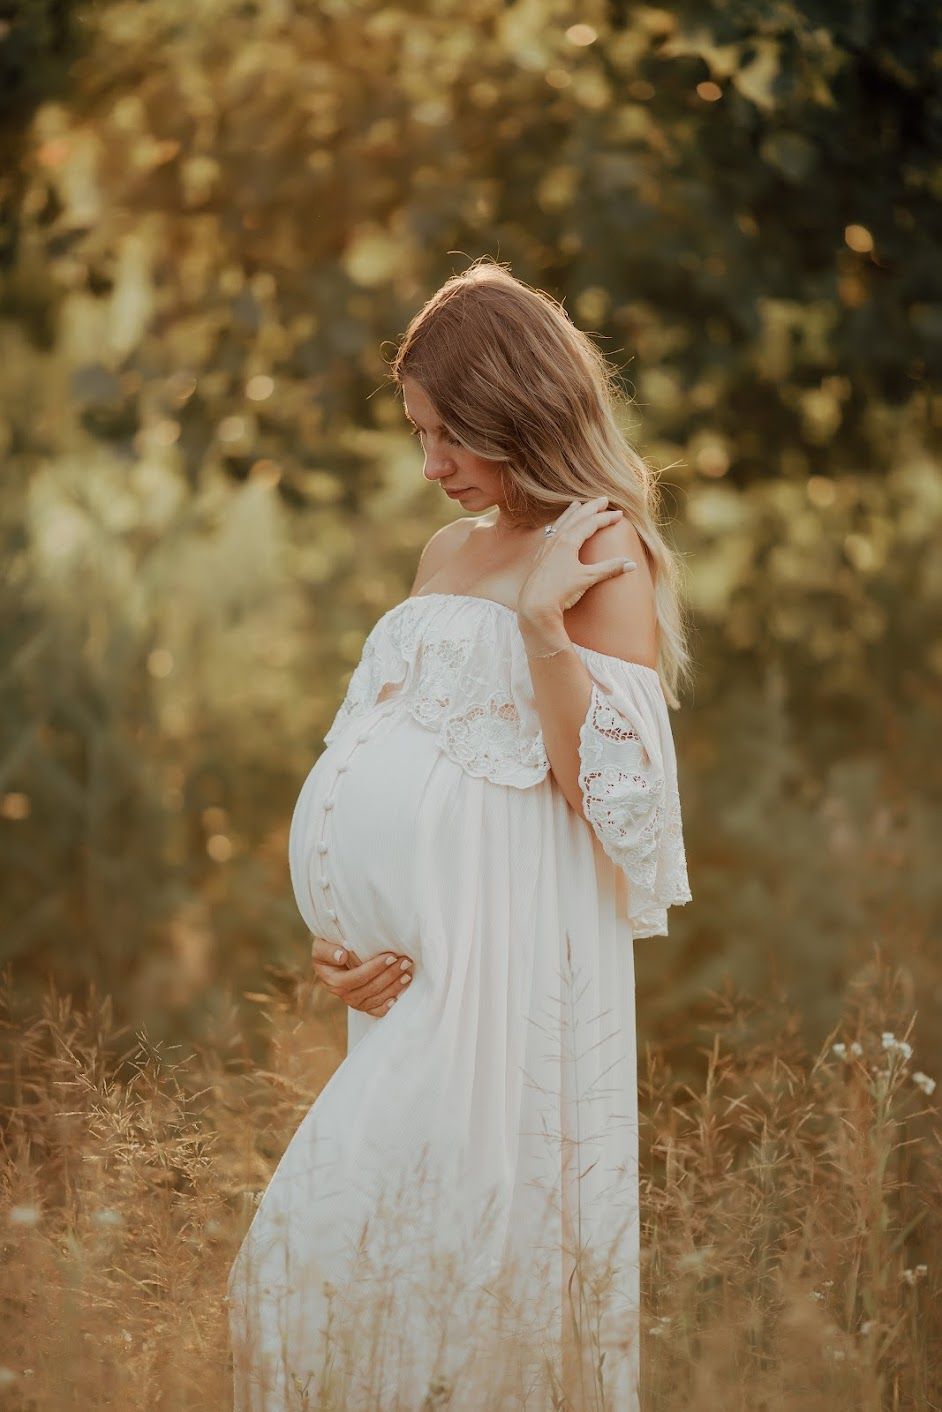 A pregnant woman in a white dress is standing in a field holding her belly.